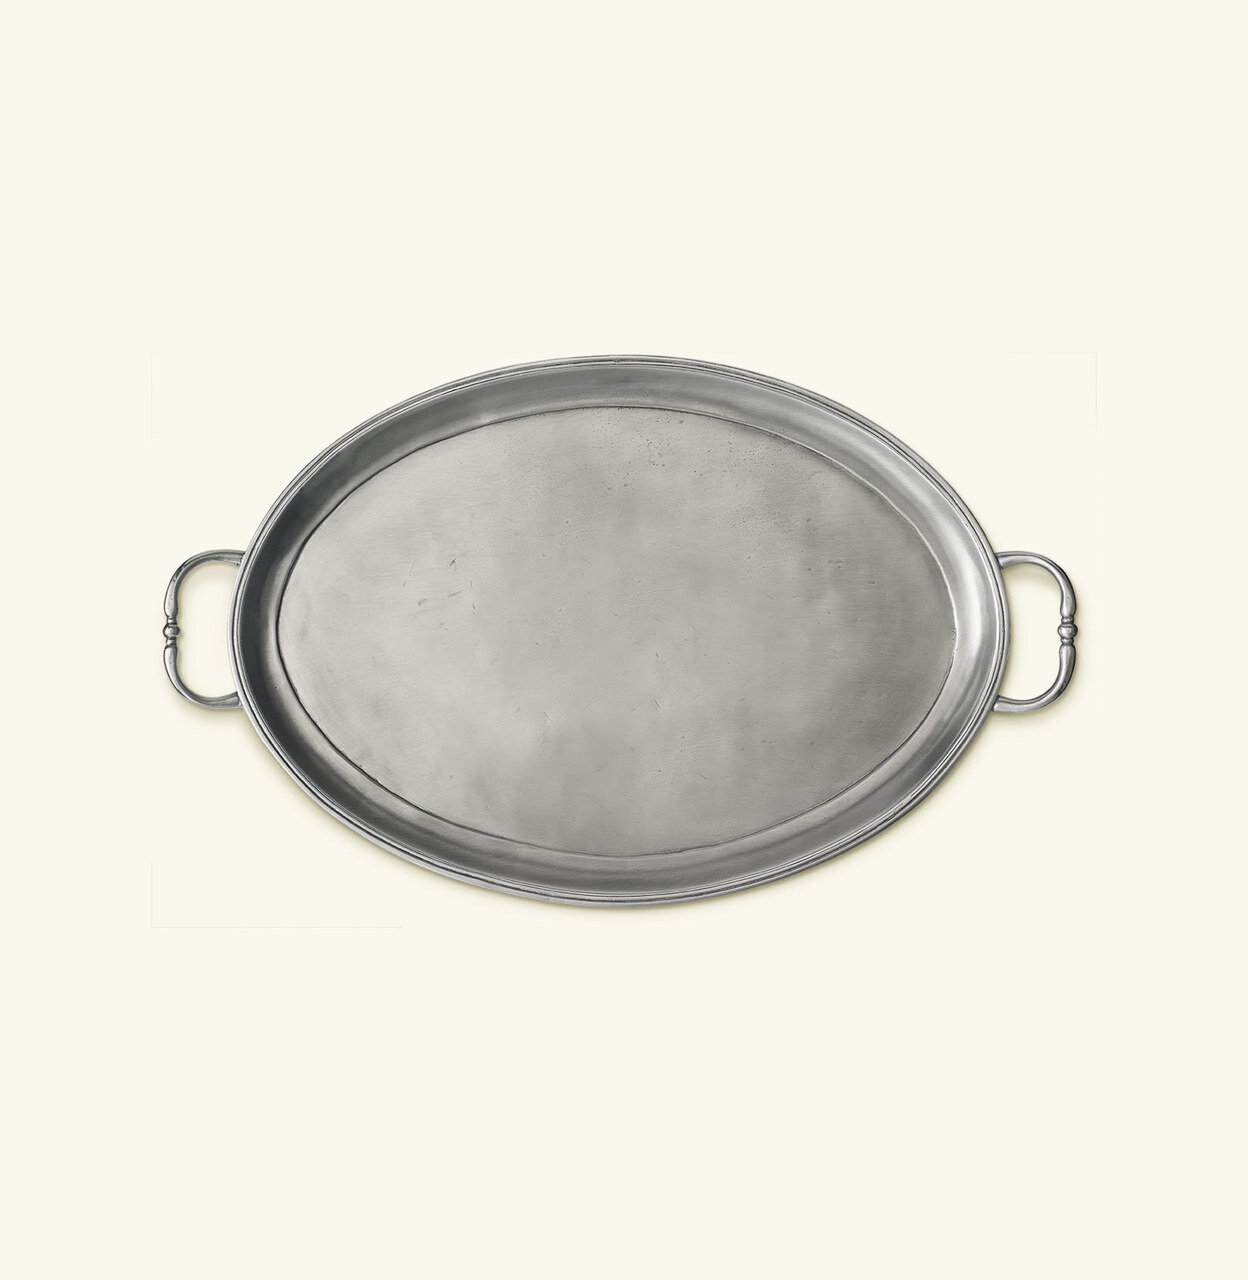 Match Pewter Oval Tray With Handles Medium a448.0